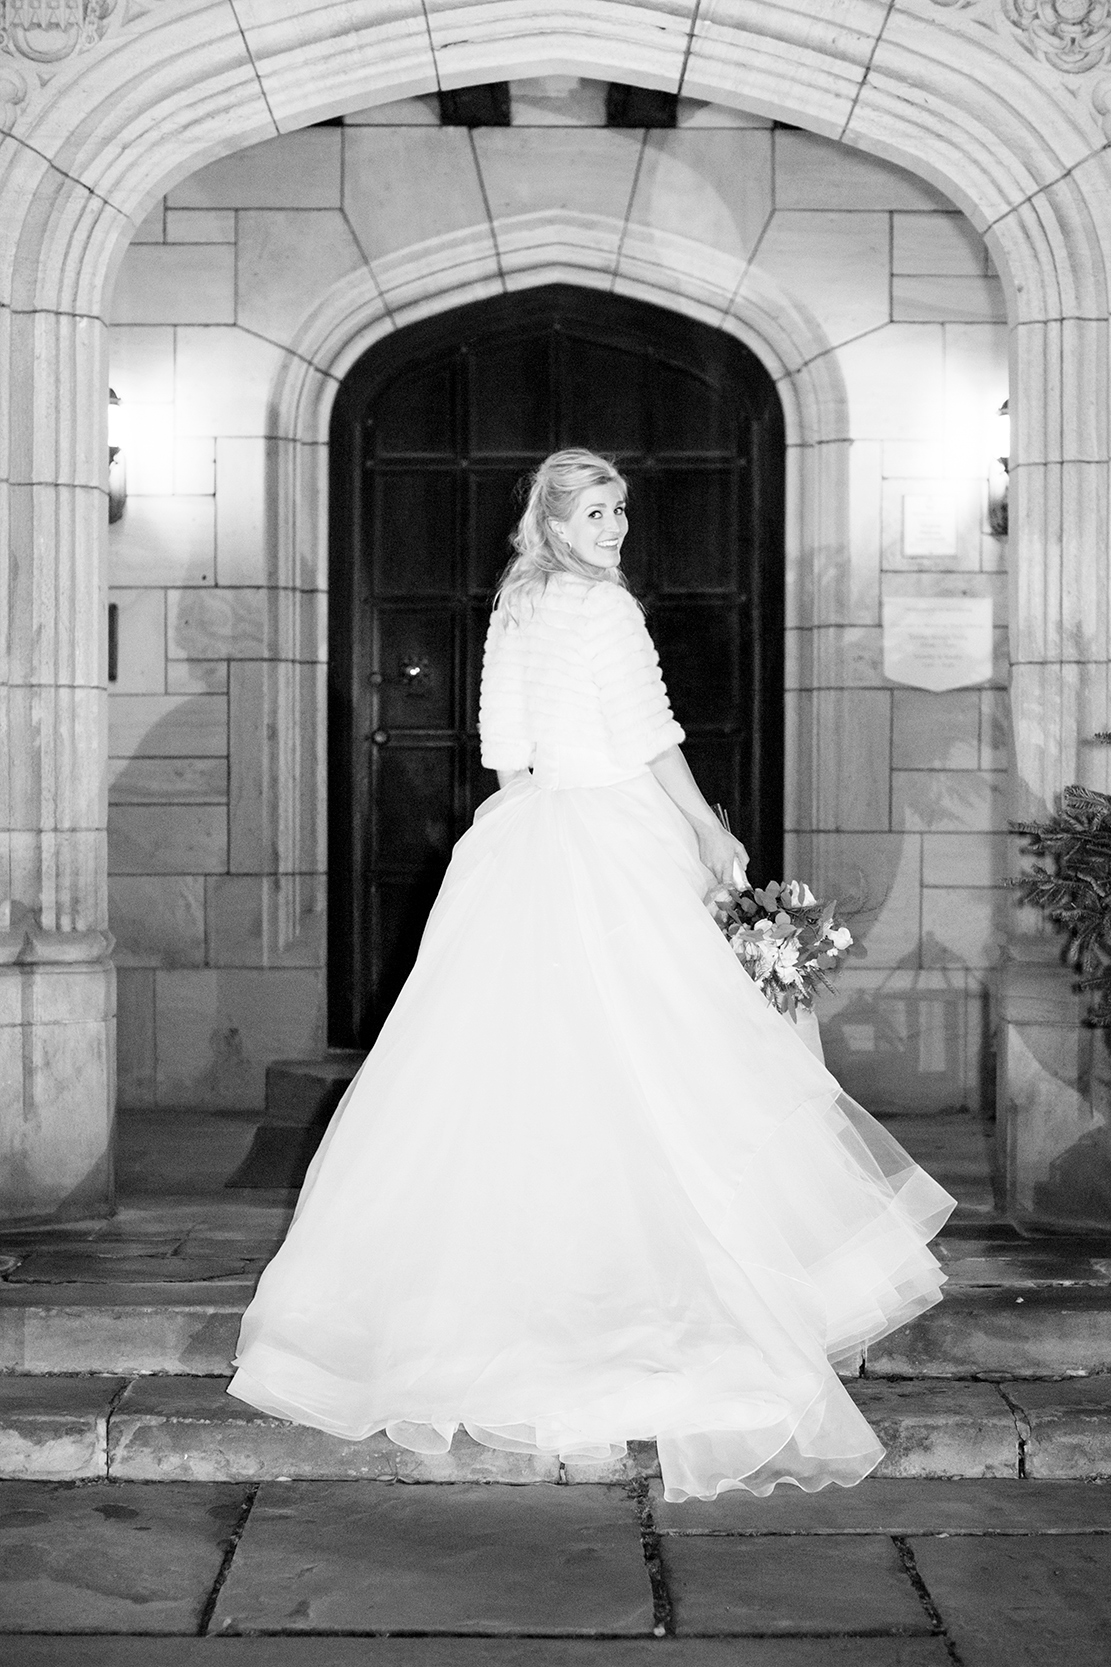 What to Consider Before Planning a Winter Wedding - Image Property of www.j-dphoto.com